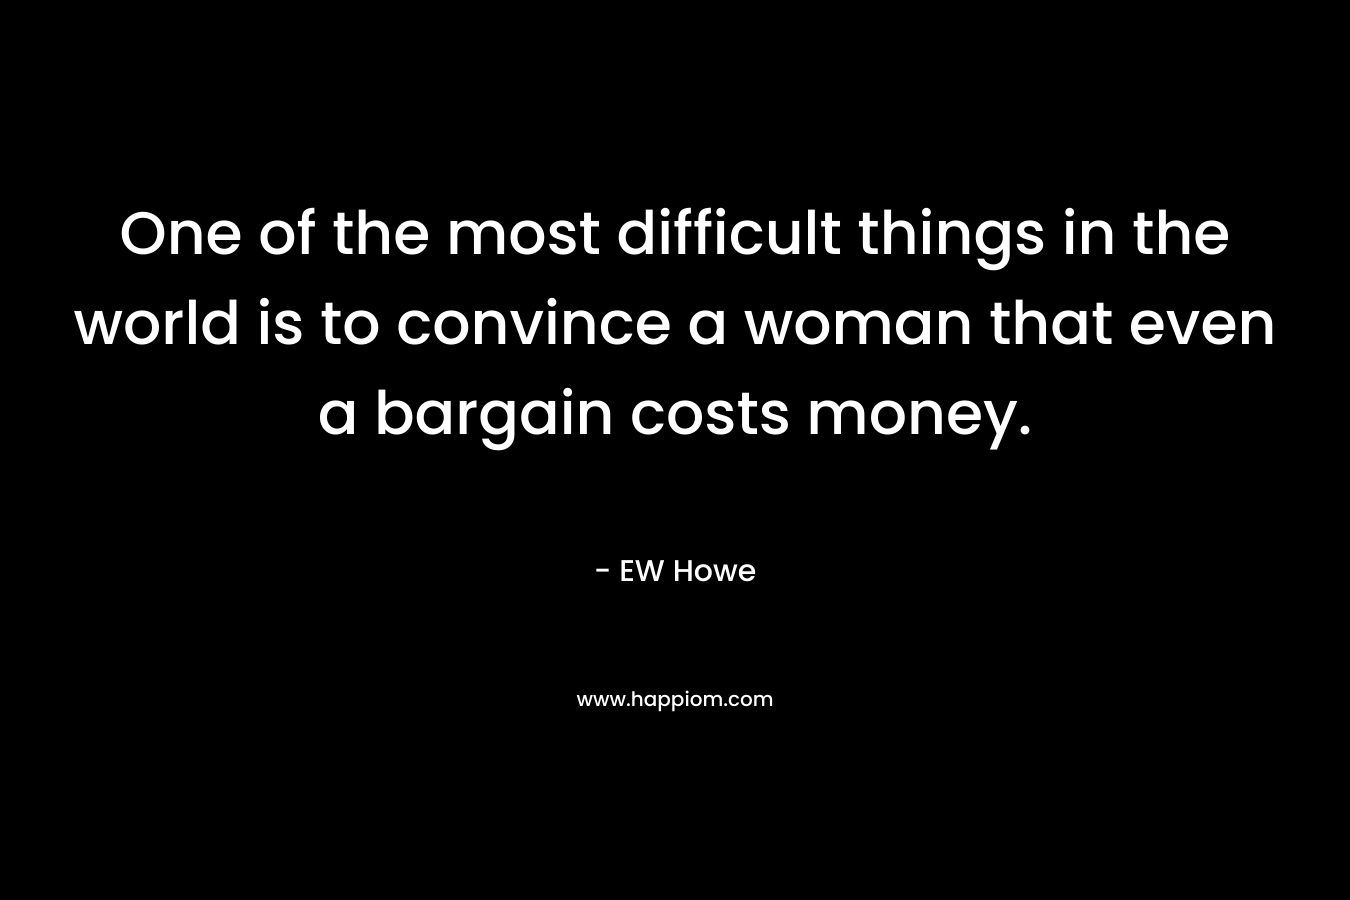 One of the most difficult things in the world is to convince a woman that even a bargain costs money.